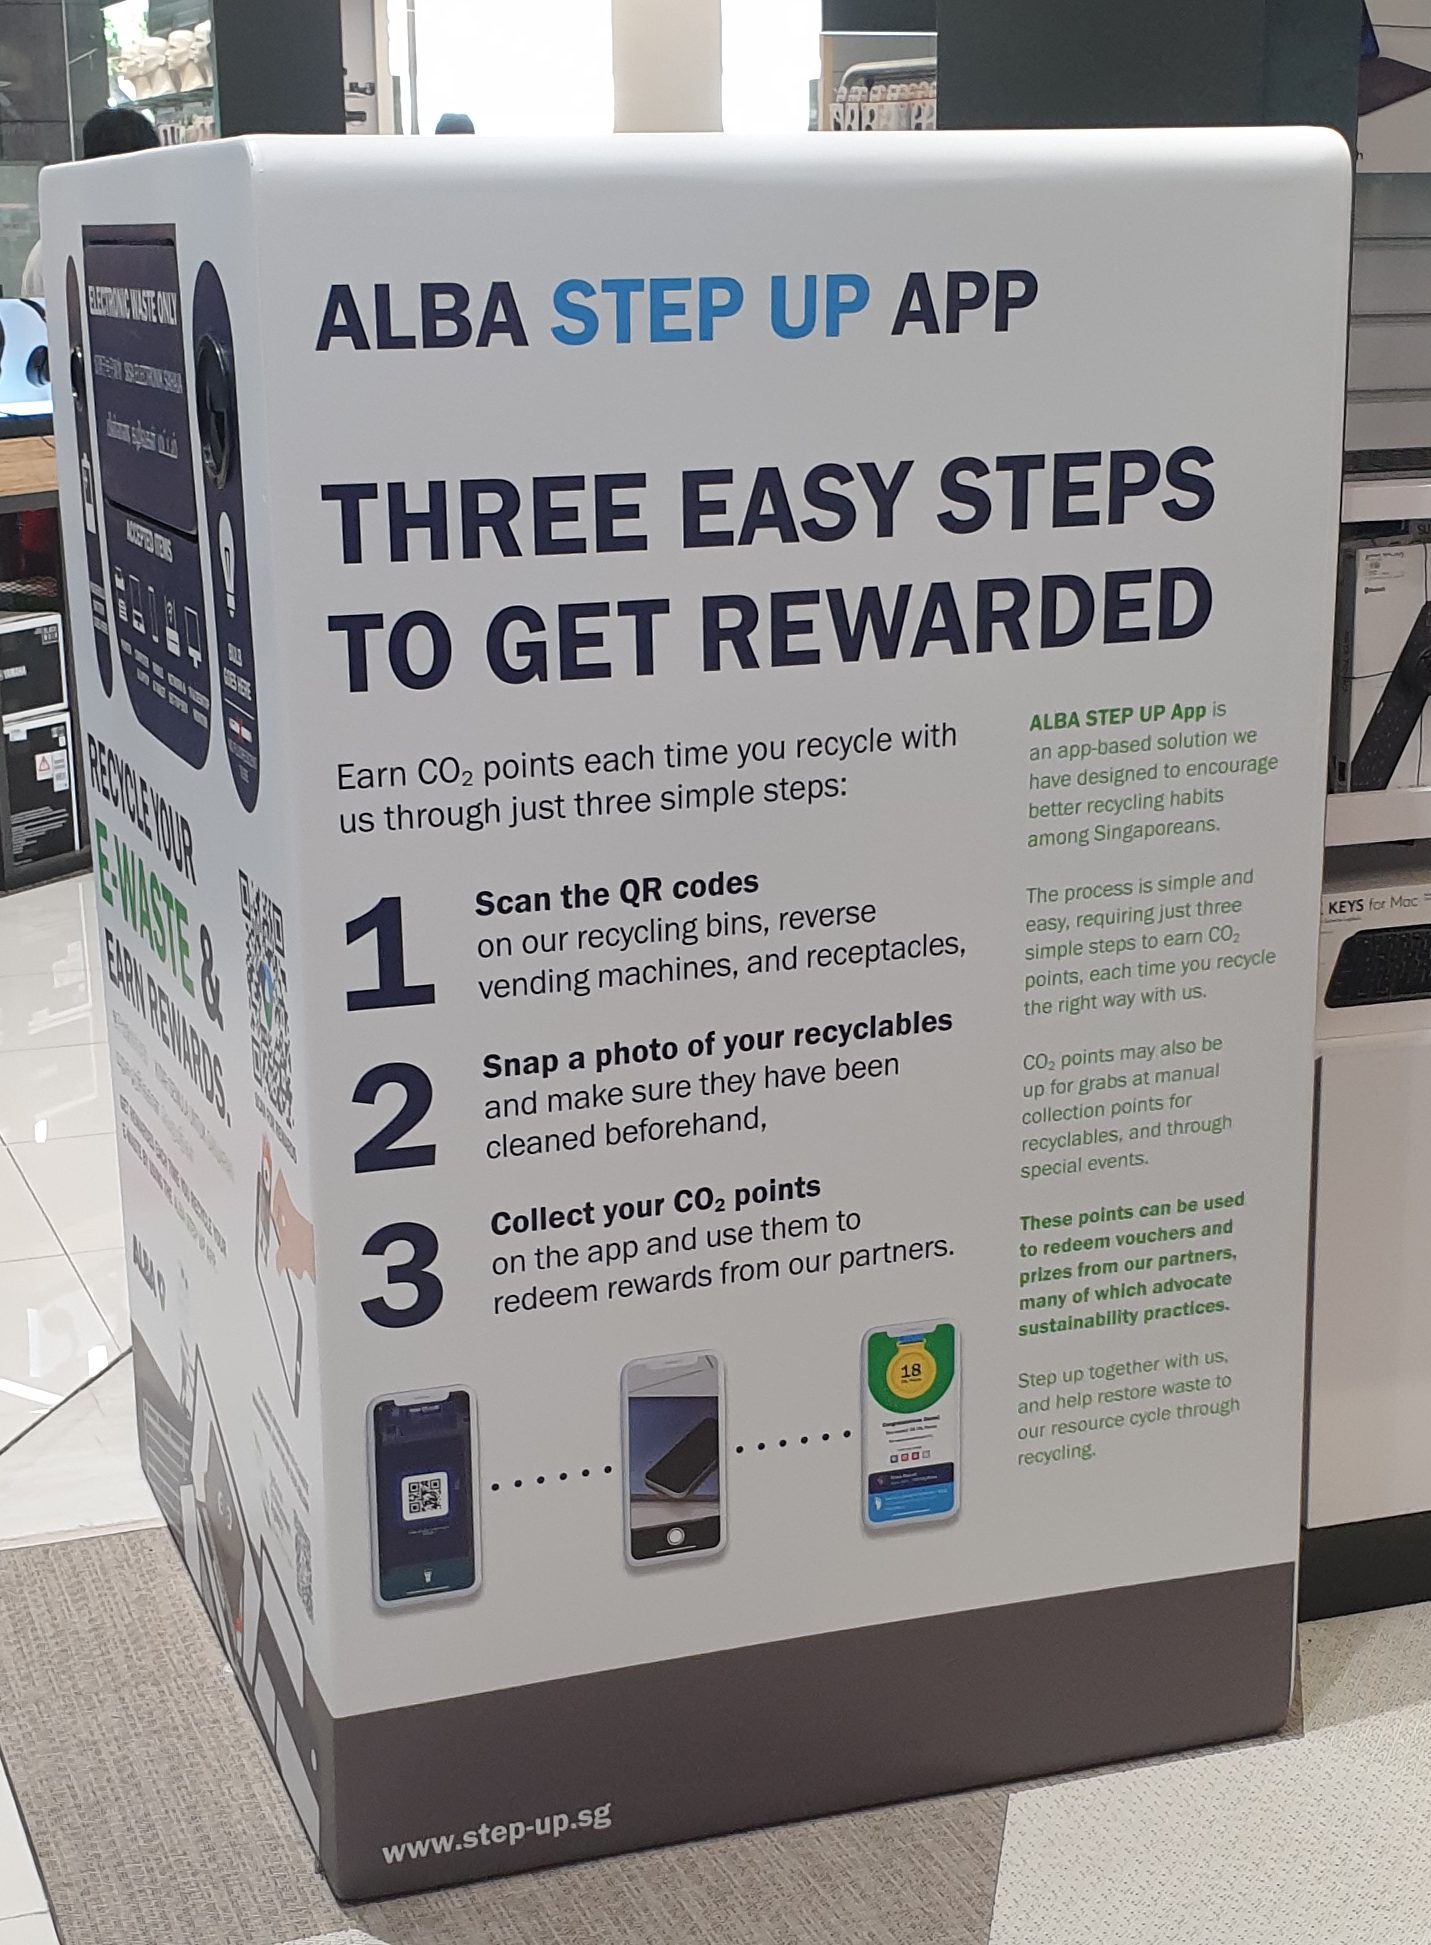 Side of the bin showing how to redeem points